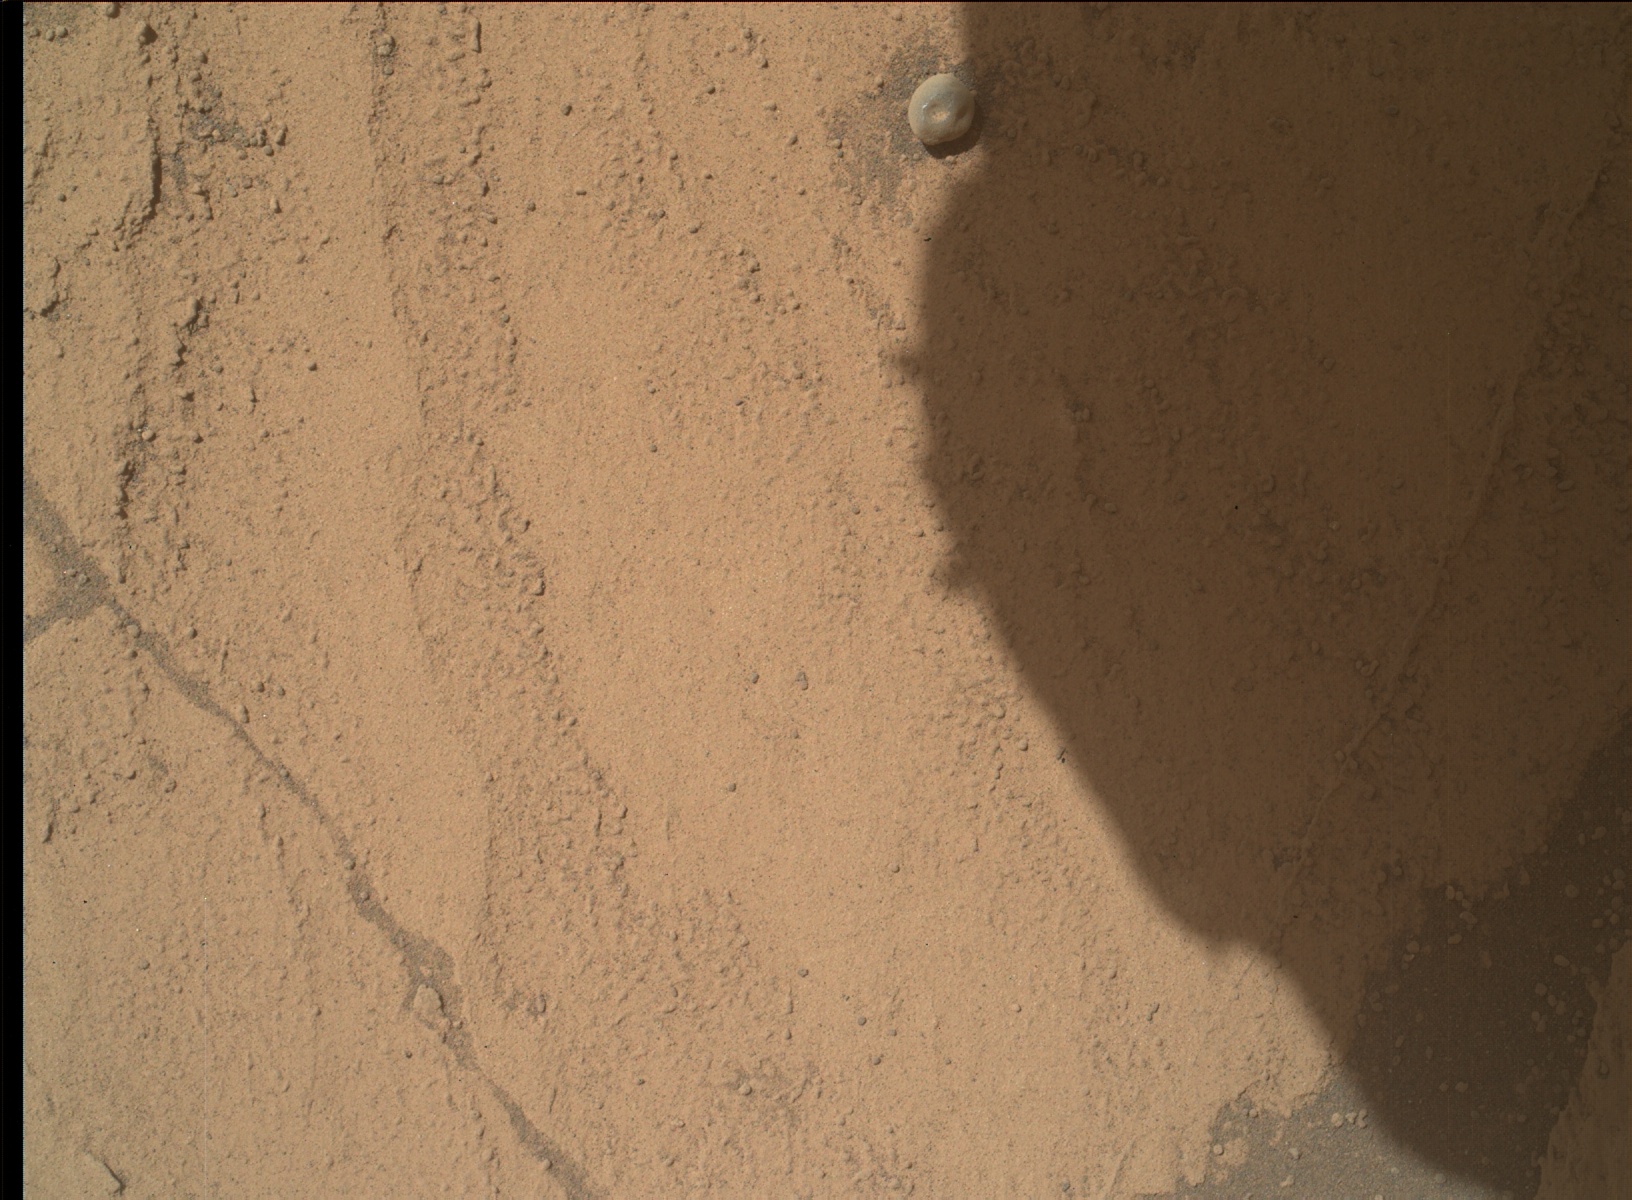 Nasa's Mars rover Curiosity acquired this image using its Mars Hand Lens Imager (MAHLI) on Sol 3212